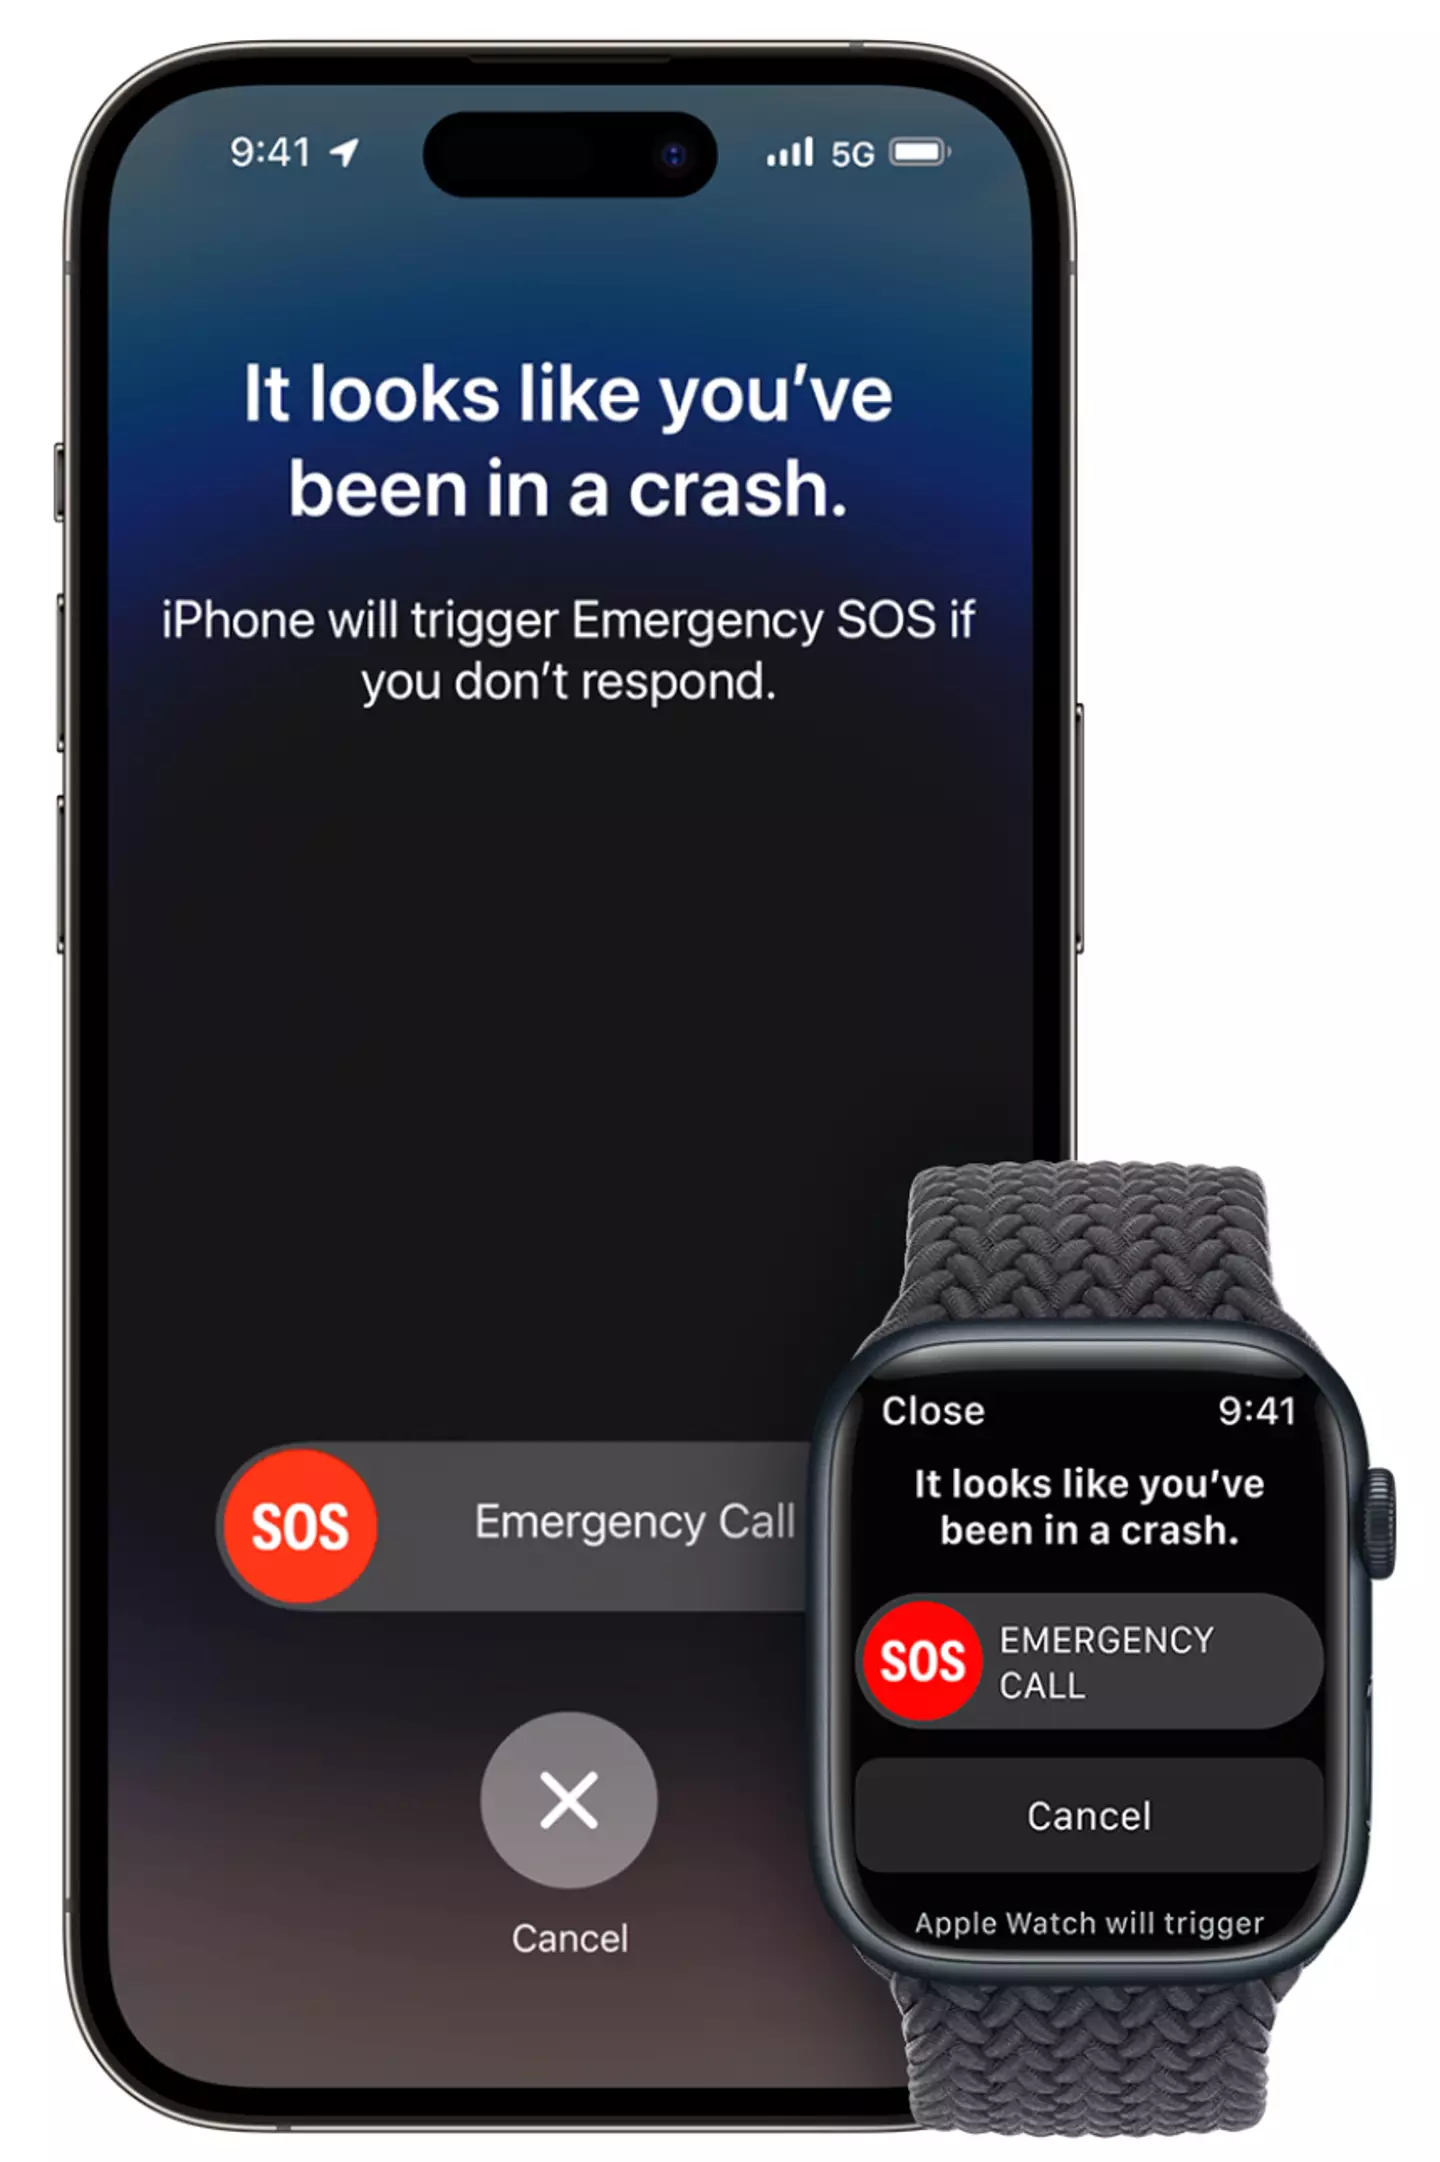 If your iPhone or Apple Watch detects you've been in a crash it will trigger the Emergency SOS function.